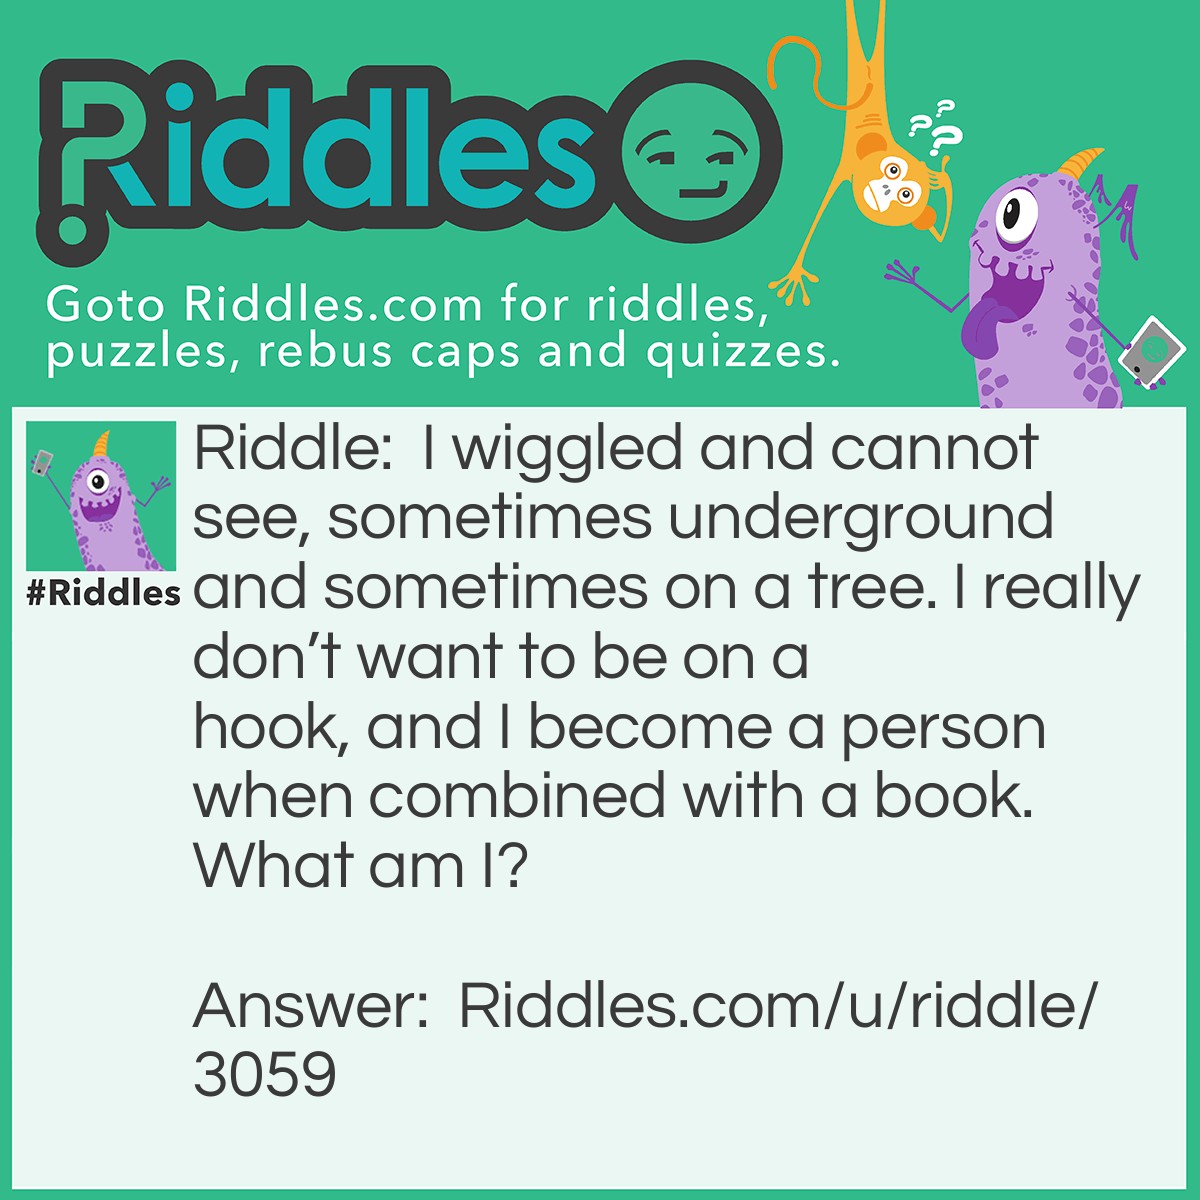 Riddle: I wiggled and cannot see, sometimes underground and sometimes on a tree. I really don't want to be on a hook, and I become a person when combined with a book. What am I? Answer: Worm